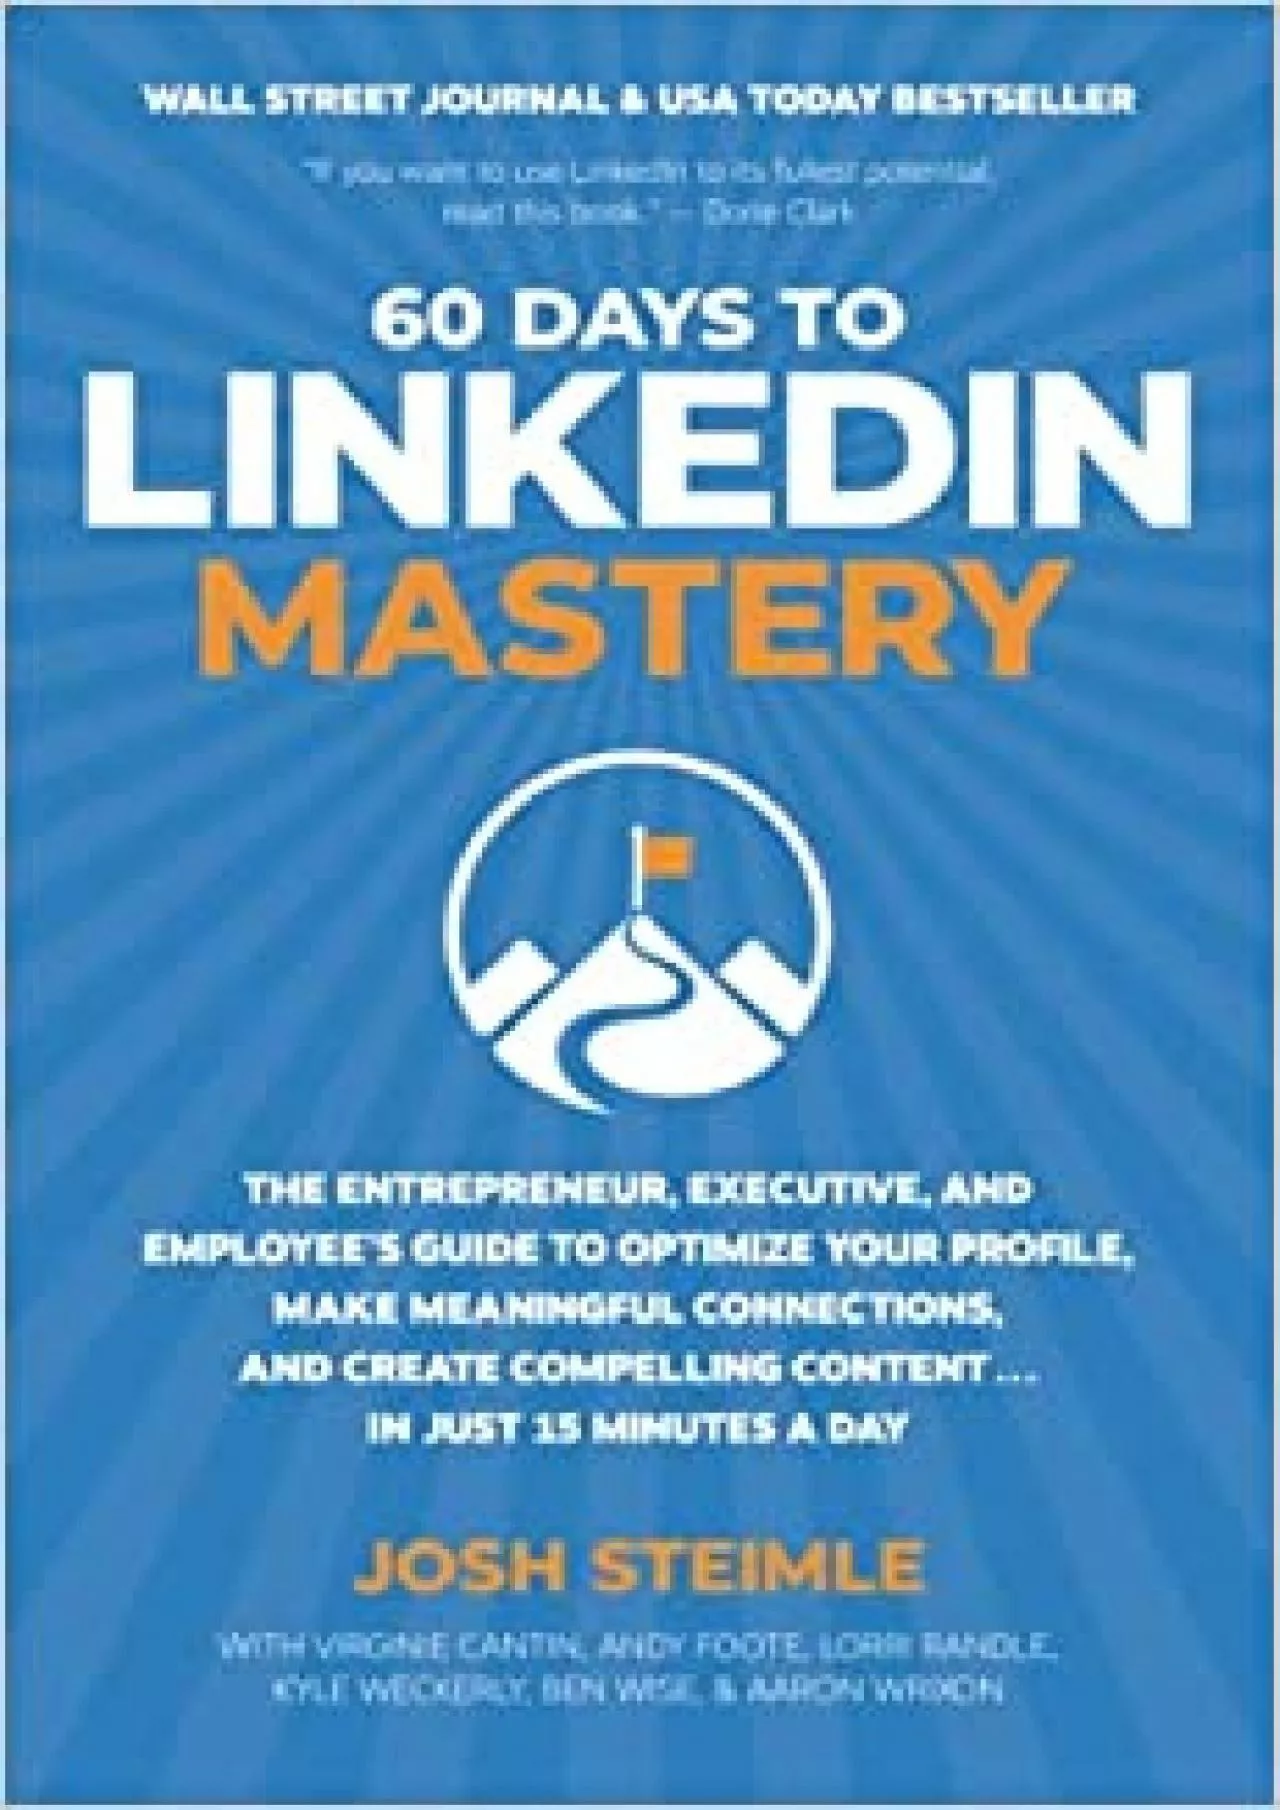 60 Days to LinkedIn Mastery The Entrepreneur Executive and Employee’s Guide to Optimize